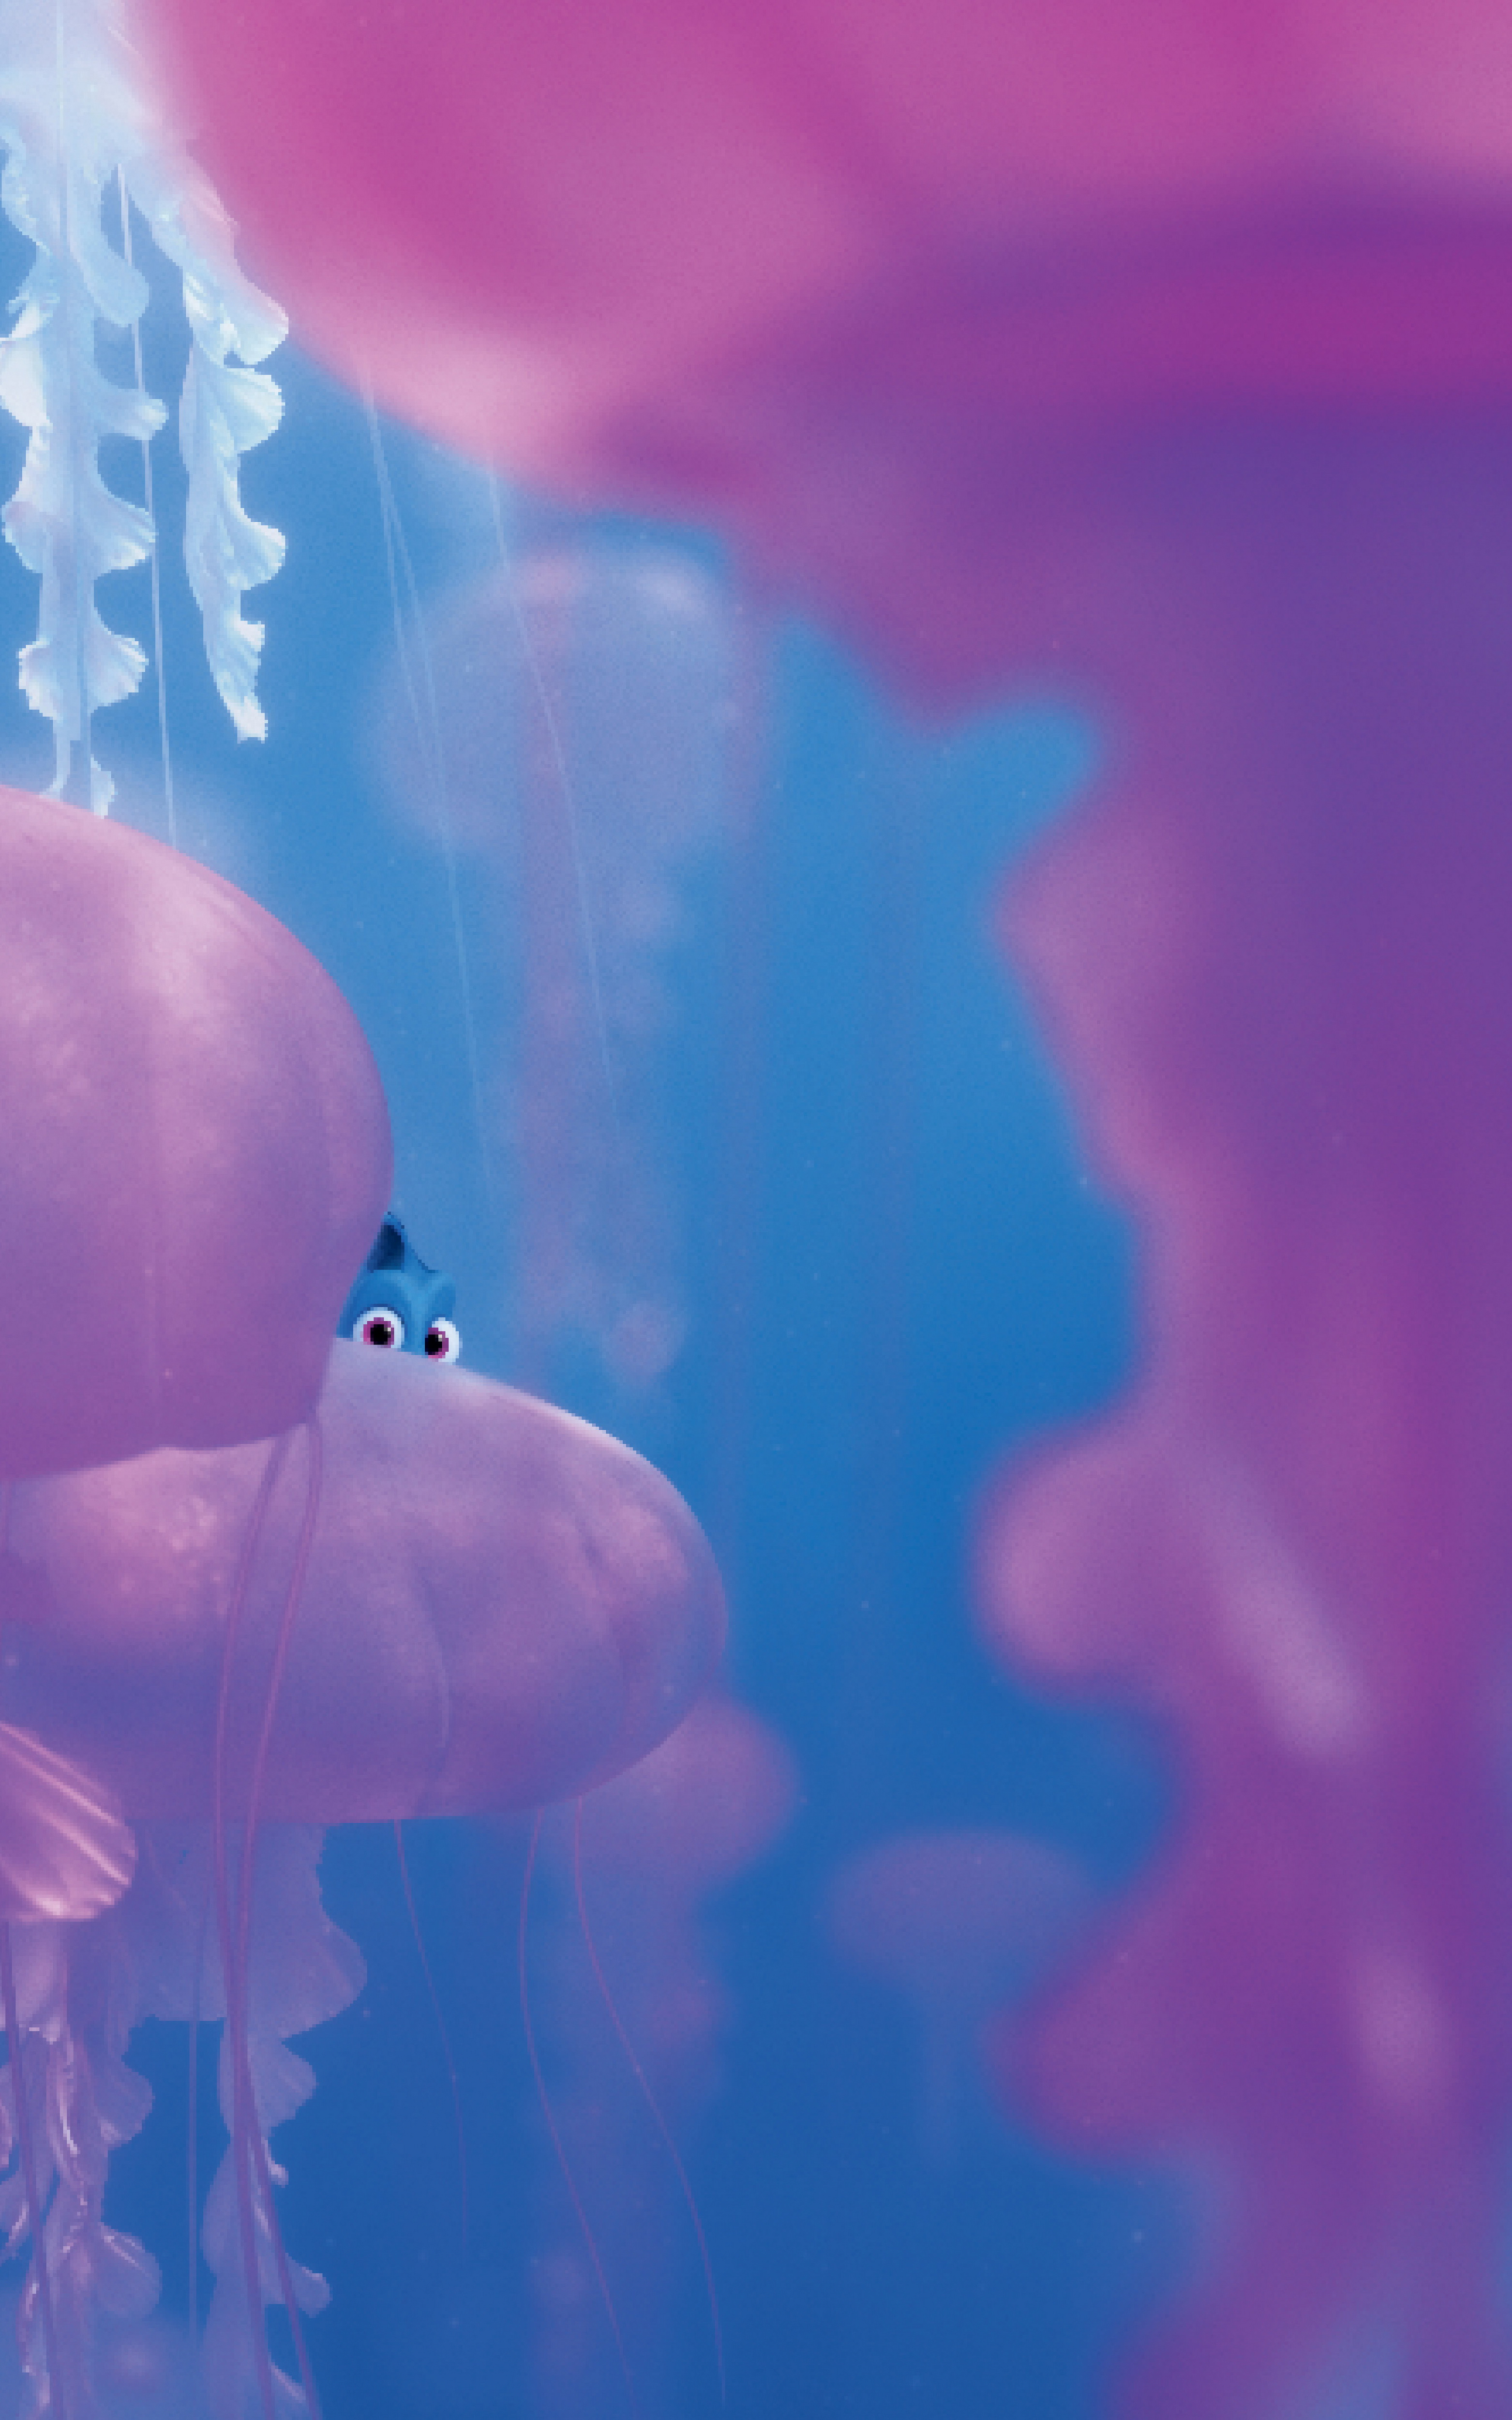 dory and squishy wallpaper